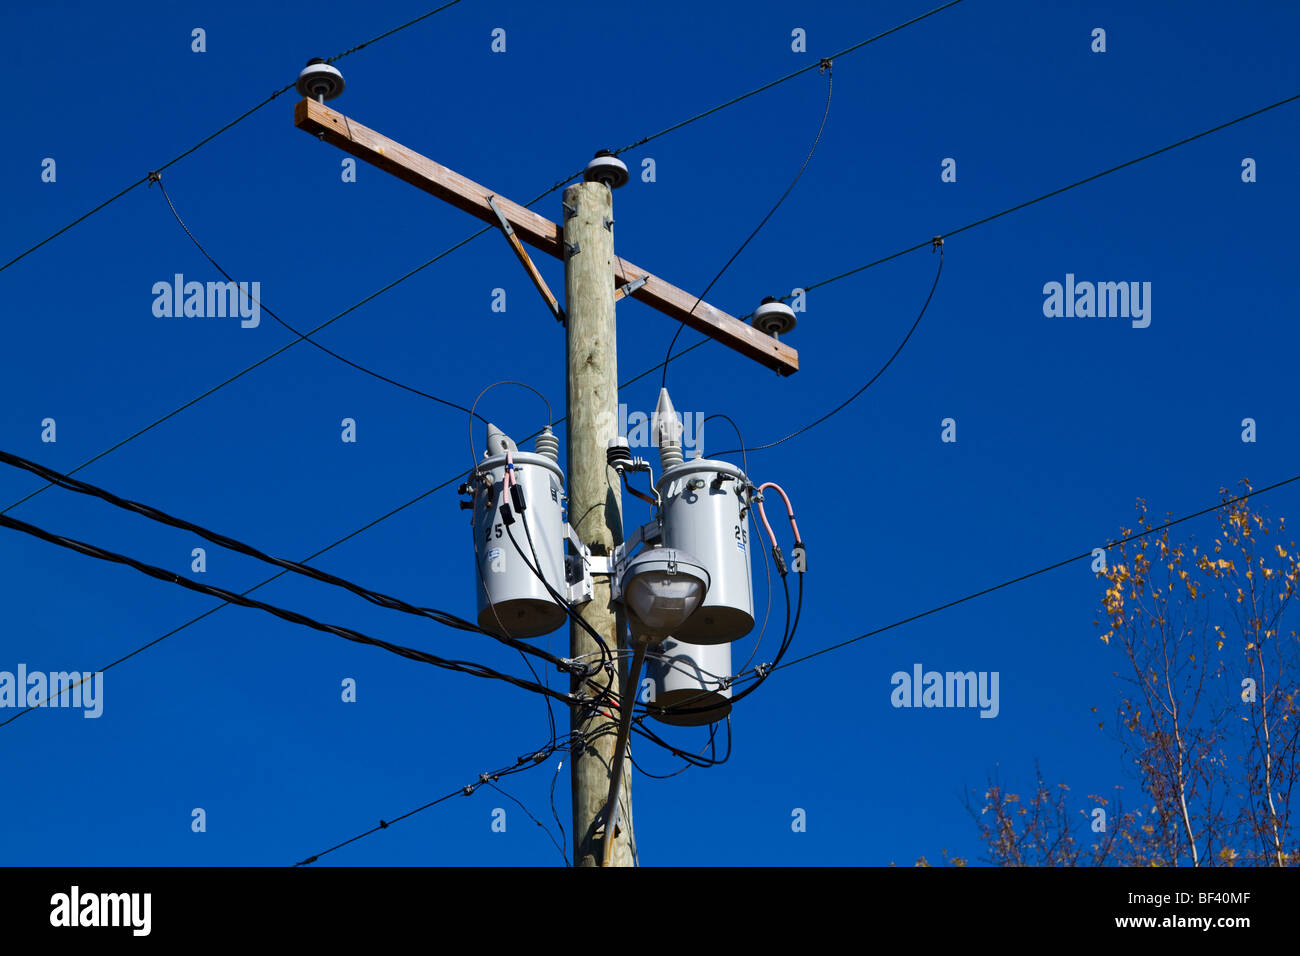 Transformers on a Utility Pole Stock Photo